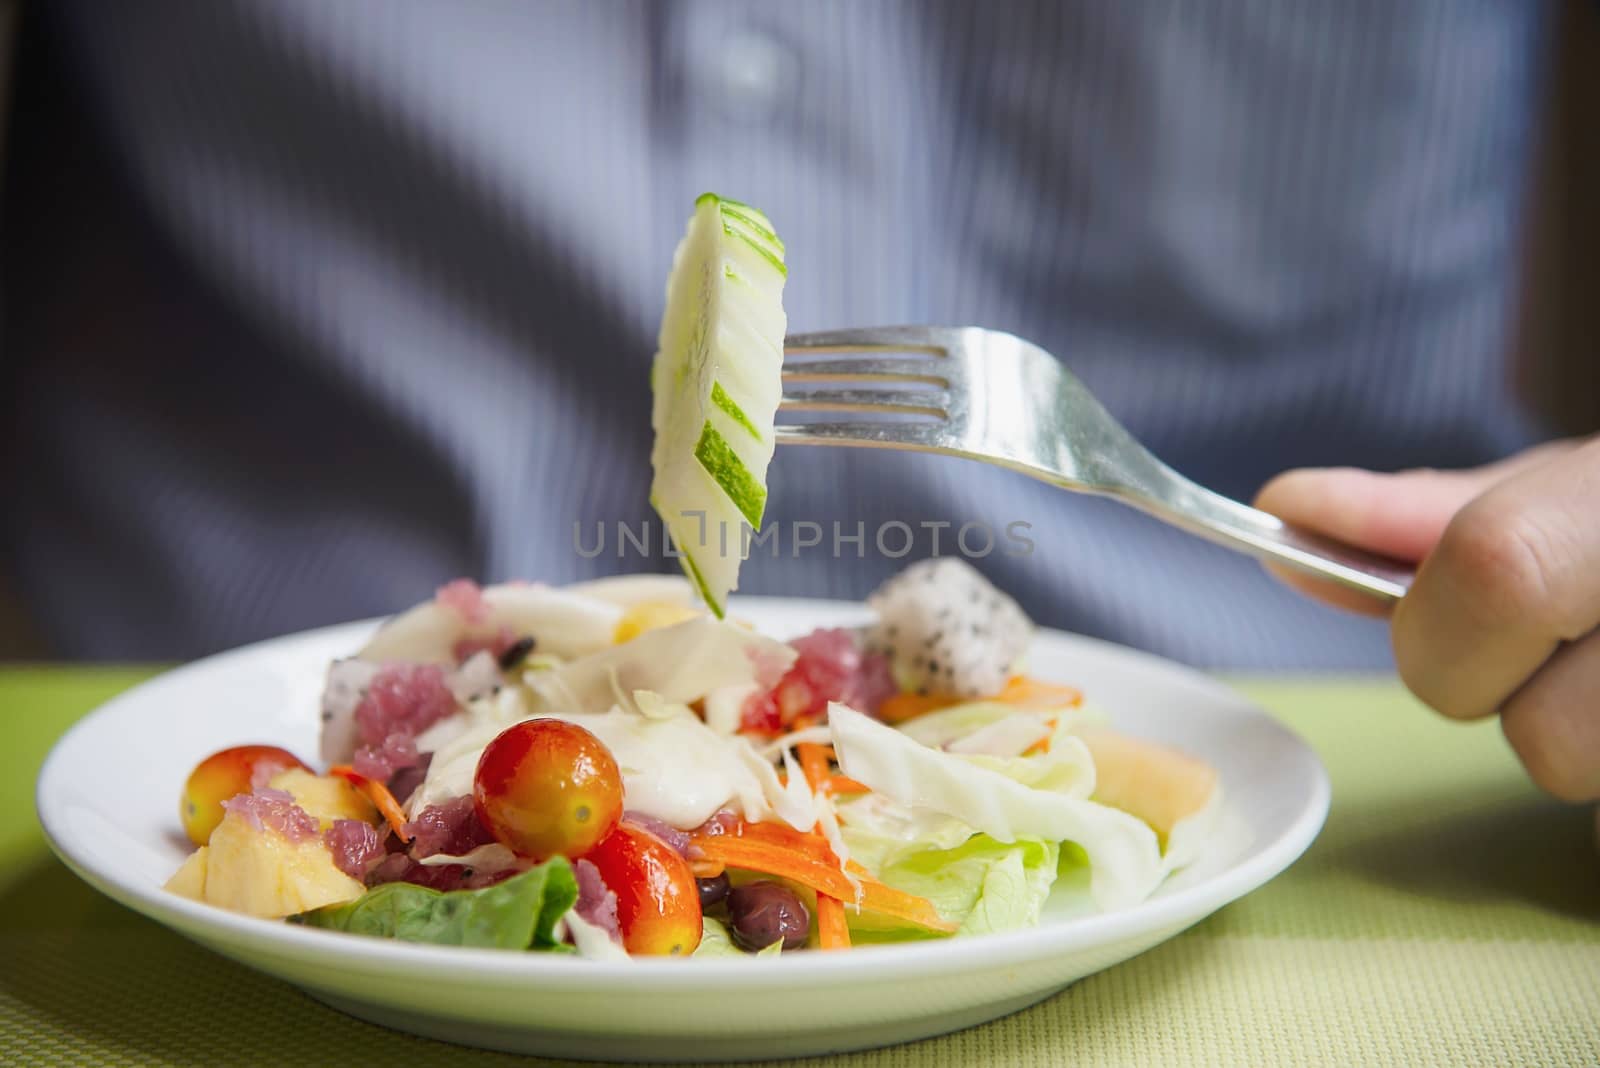 Man ready to eat vegetable salad - people with clean fresh healthy food concept by pairhandmade